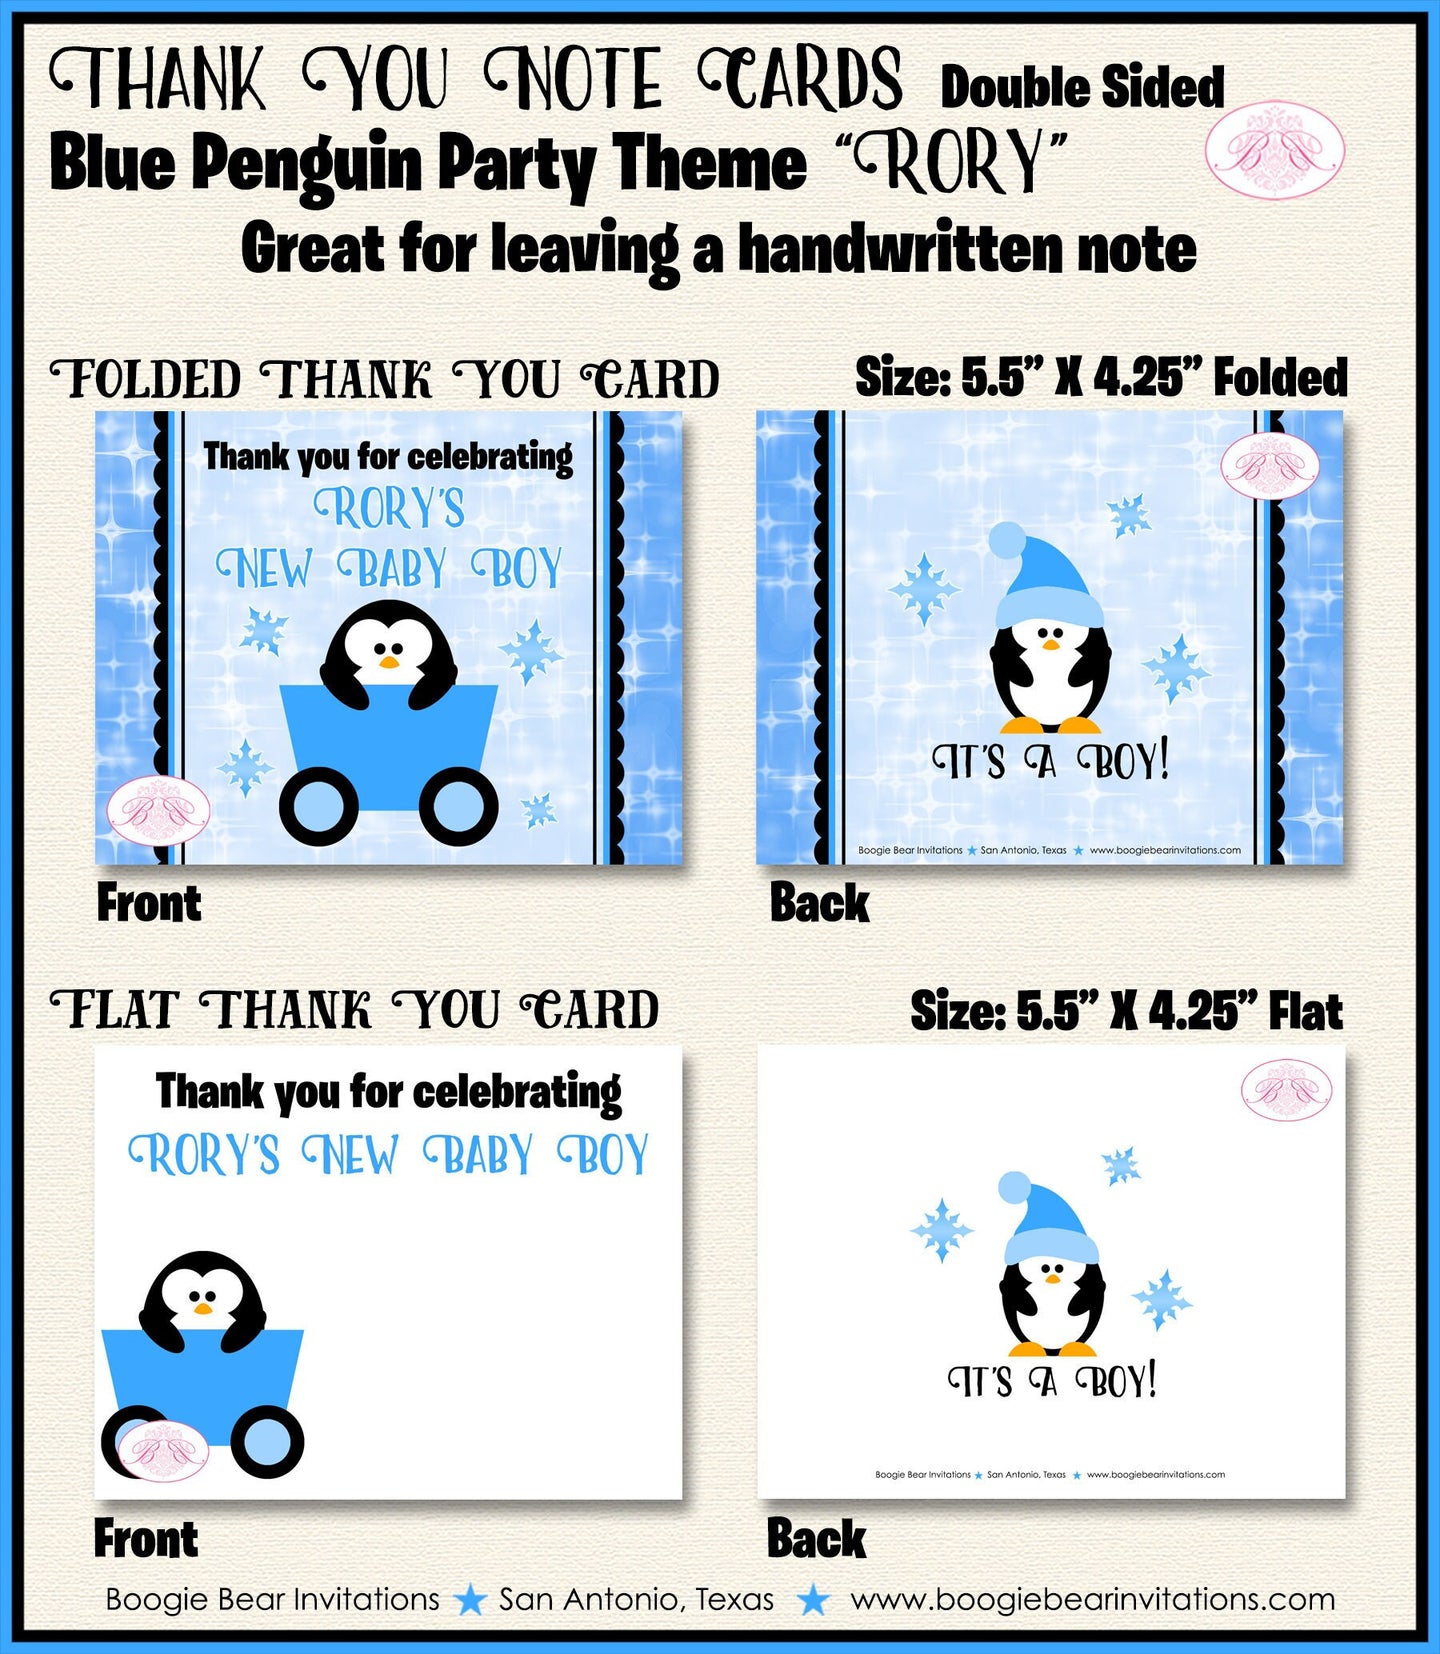 Blue Penguin Baby Shower Party Thank You Cards Girl Winter Little Snowflake Star Snow Christmas Boogie Bear Invitations Rory Theme Printed